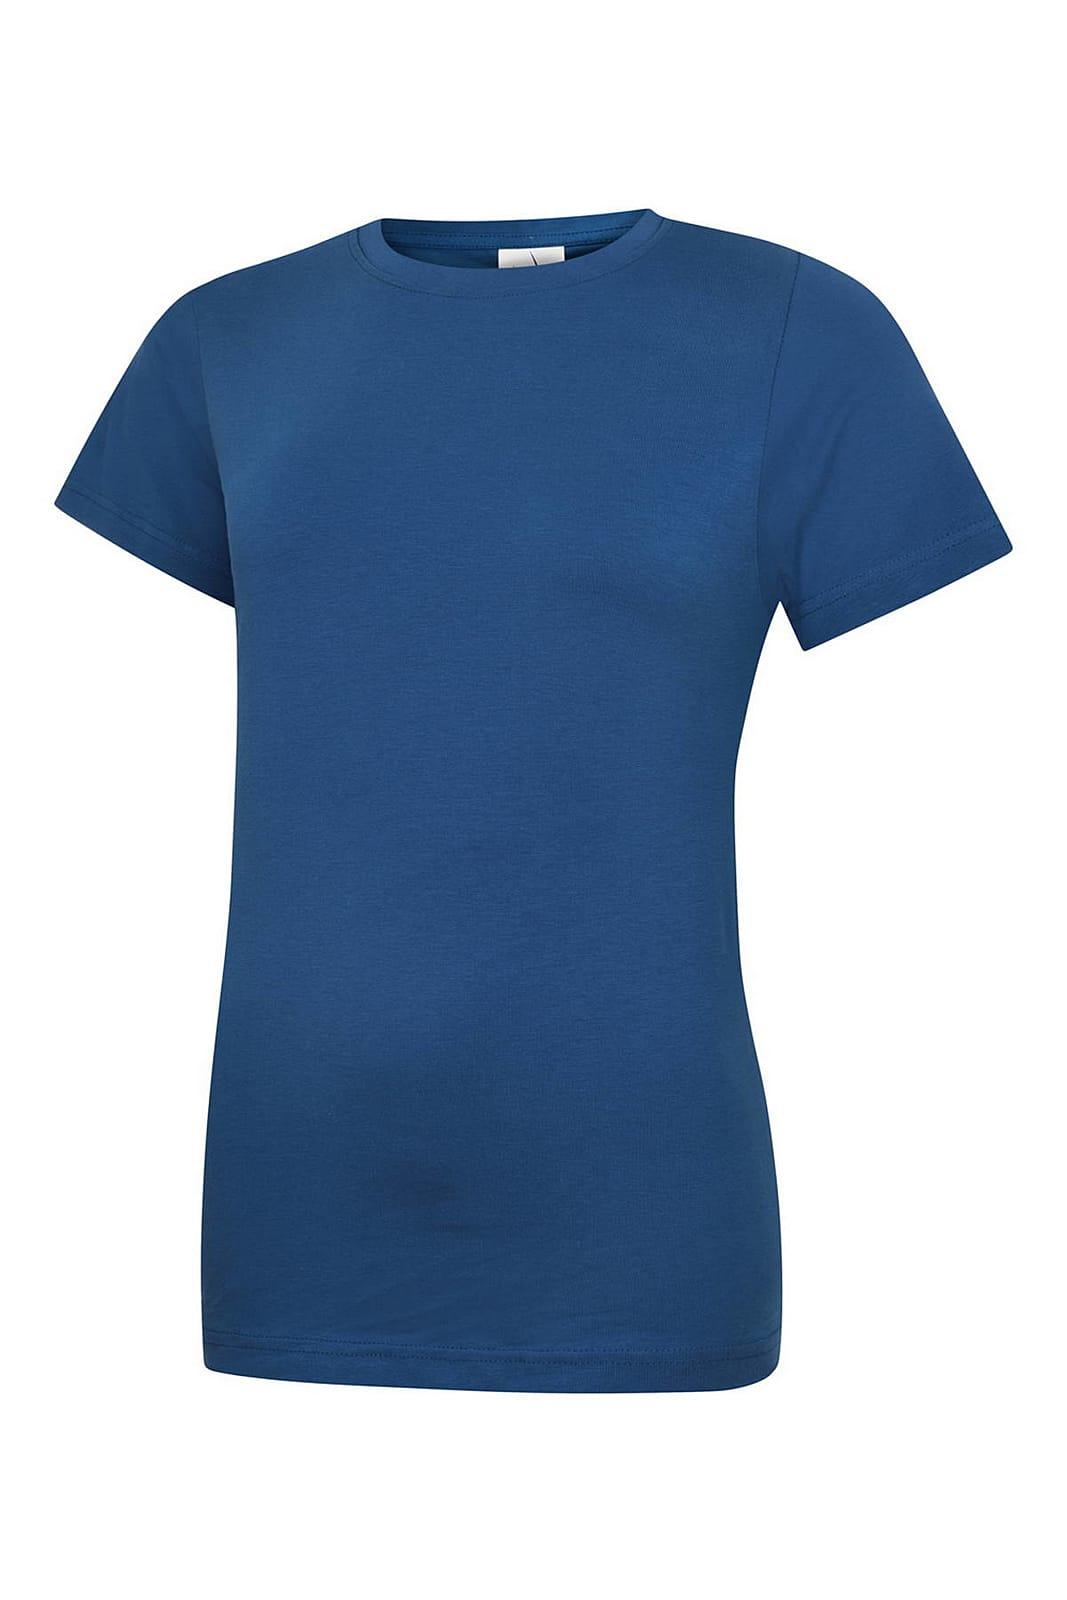 Uneek Womens Classic Crew Neck T-Shirt in Royal Blue (Product Code: UC318)